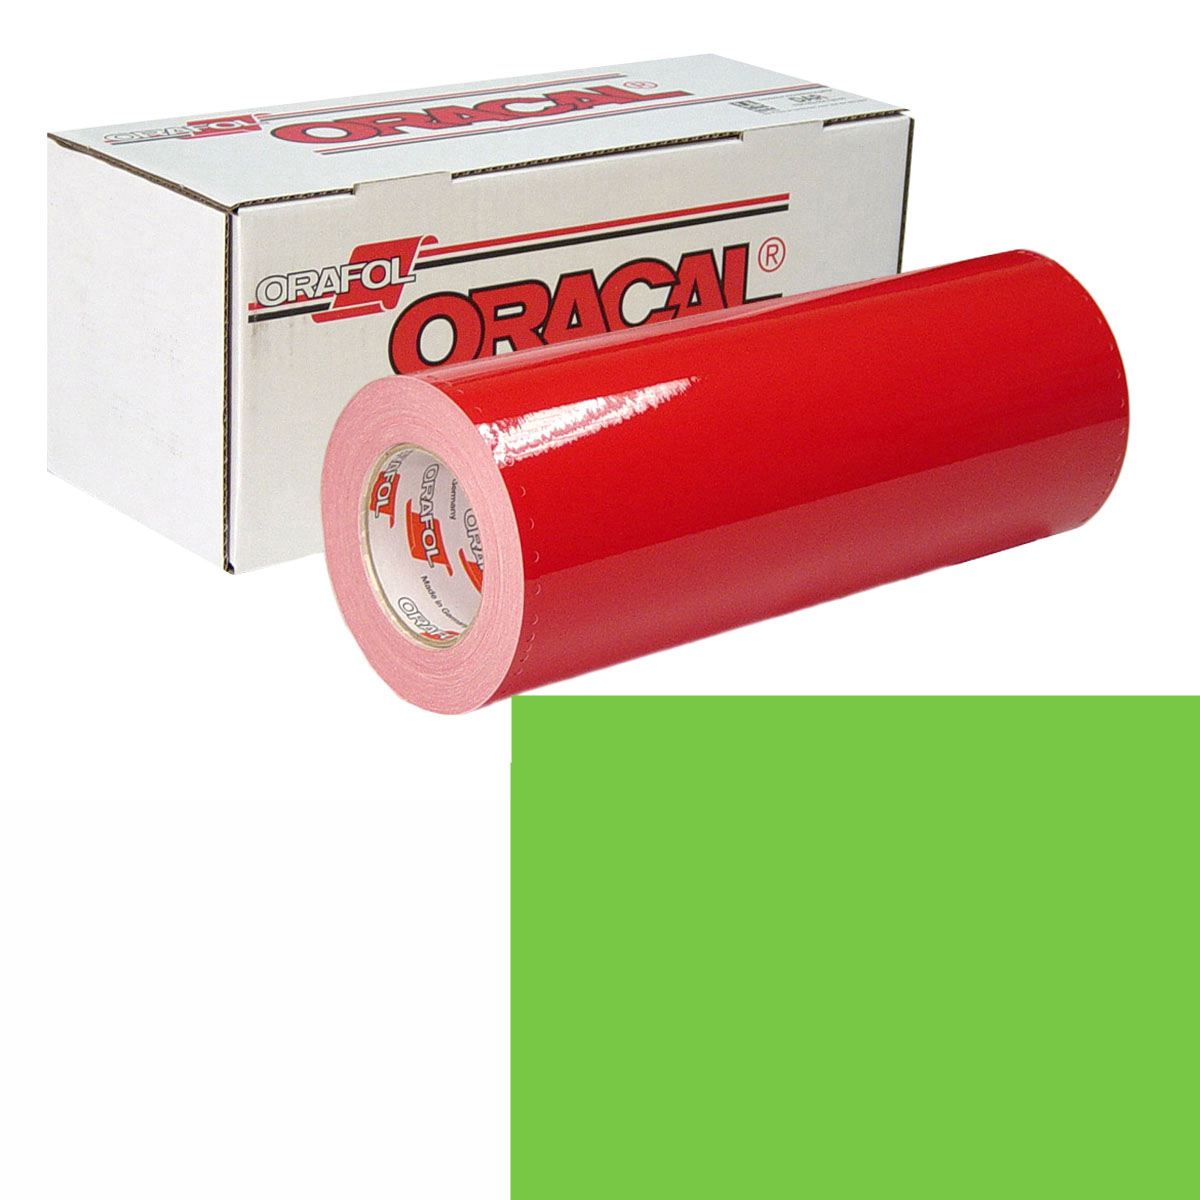 ORACAL 951 30in X 50yd 601 Lime Green